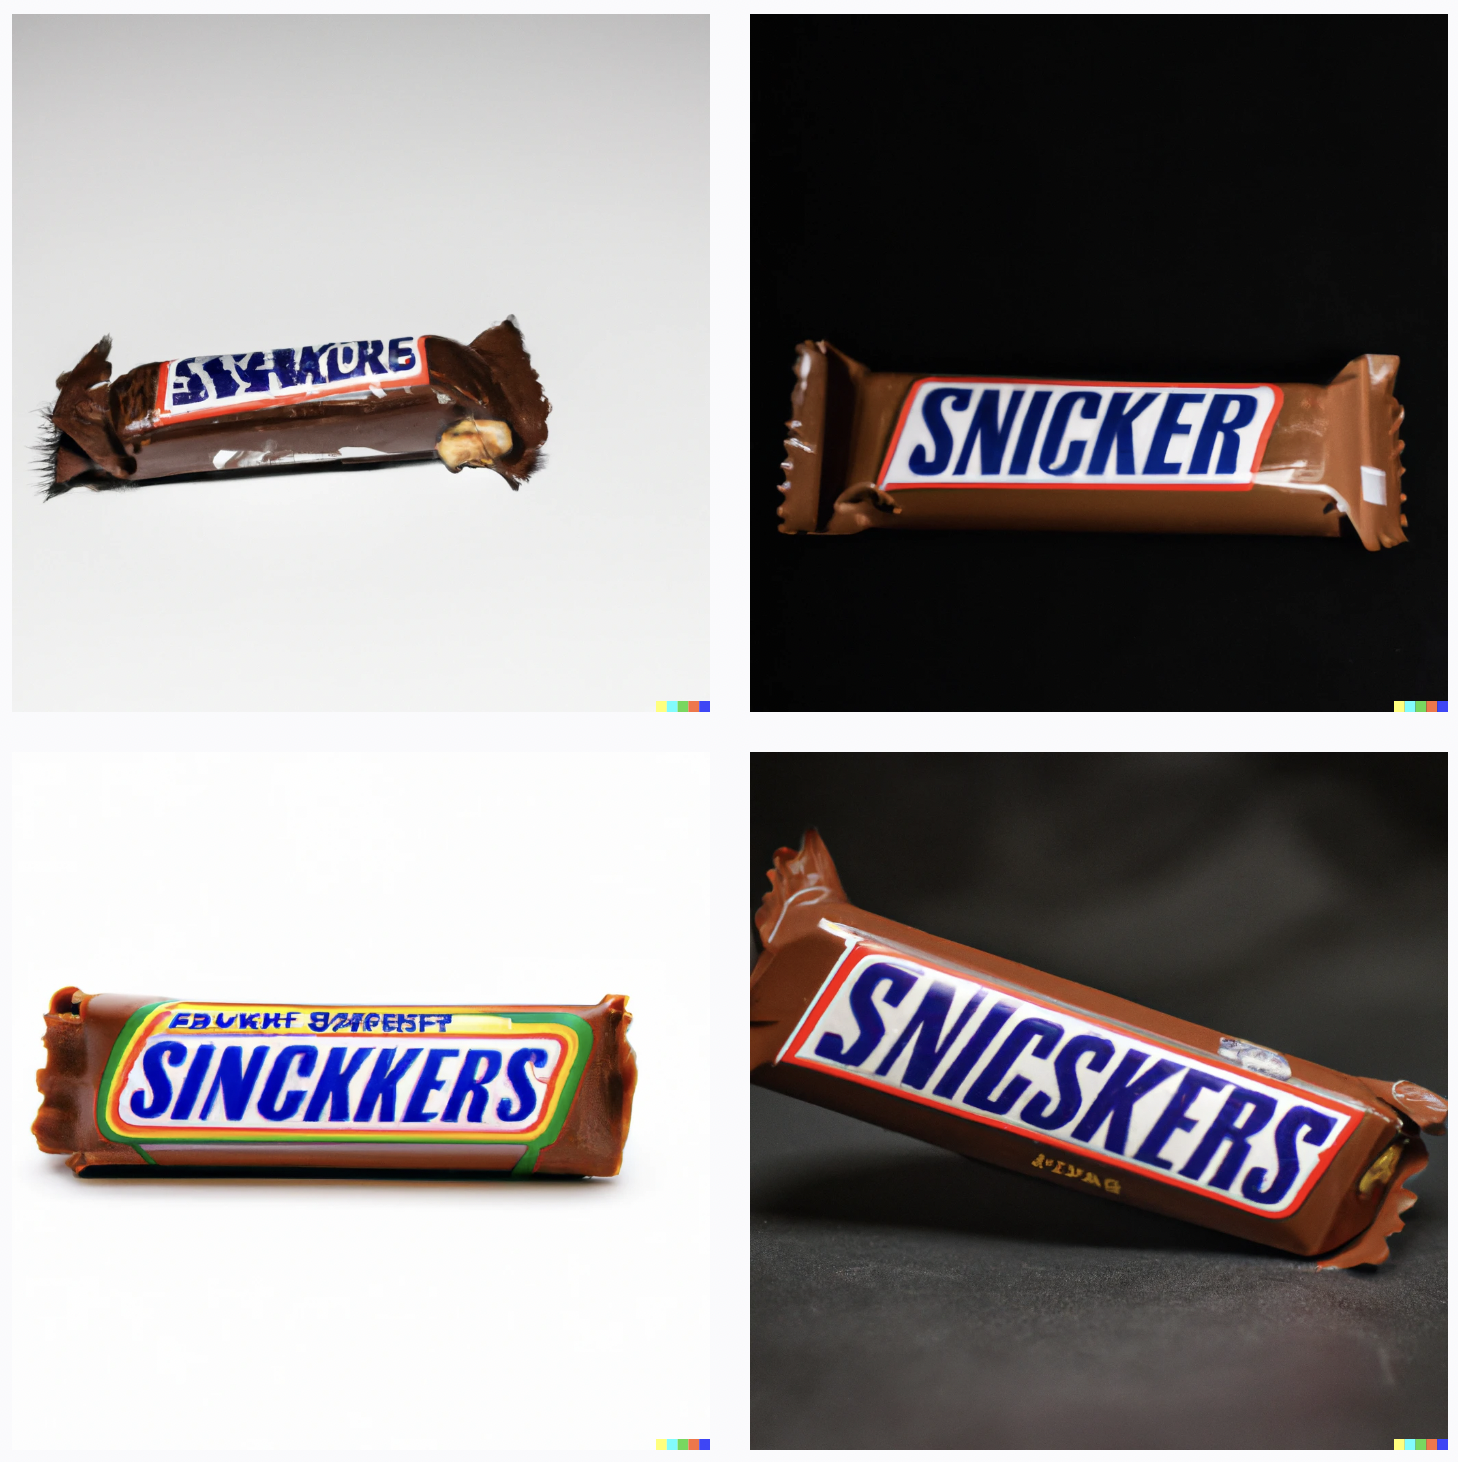 Reasonable approximations of the logo and color scheme of snickers bars, although the text reads "Snicskers" and "Sinckkers" and "Snicker"